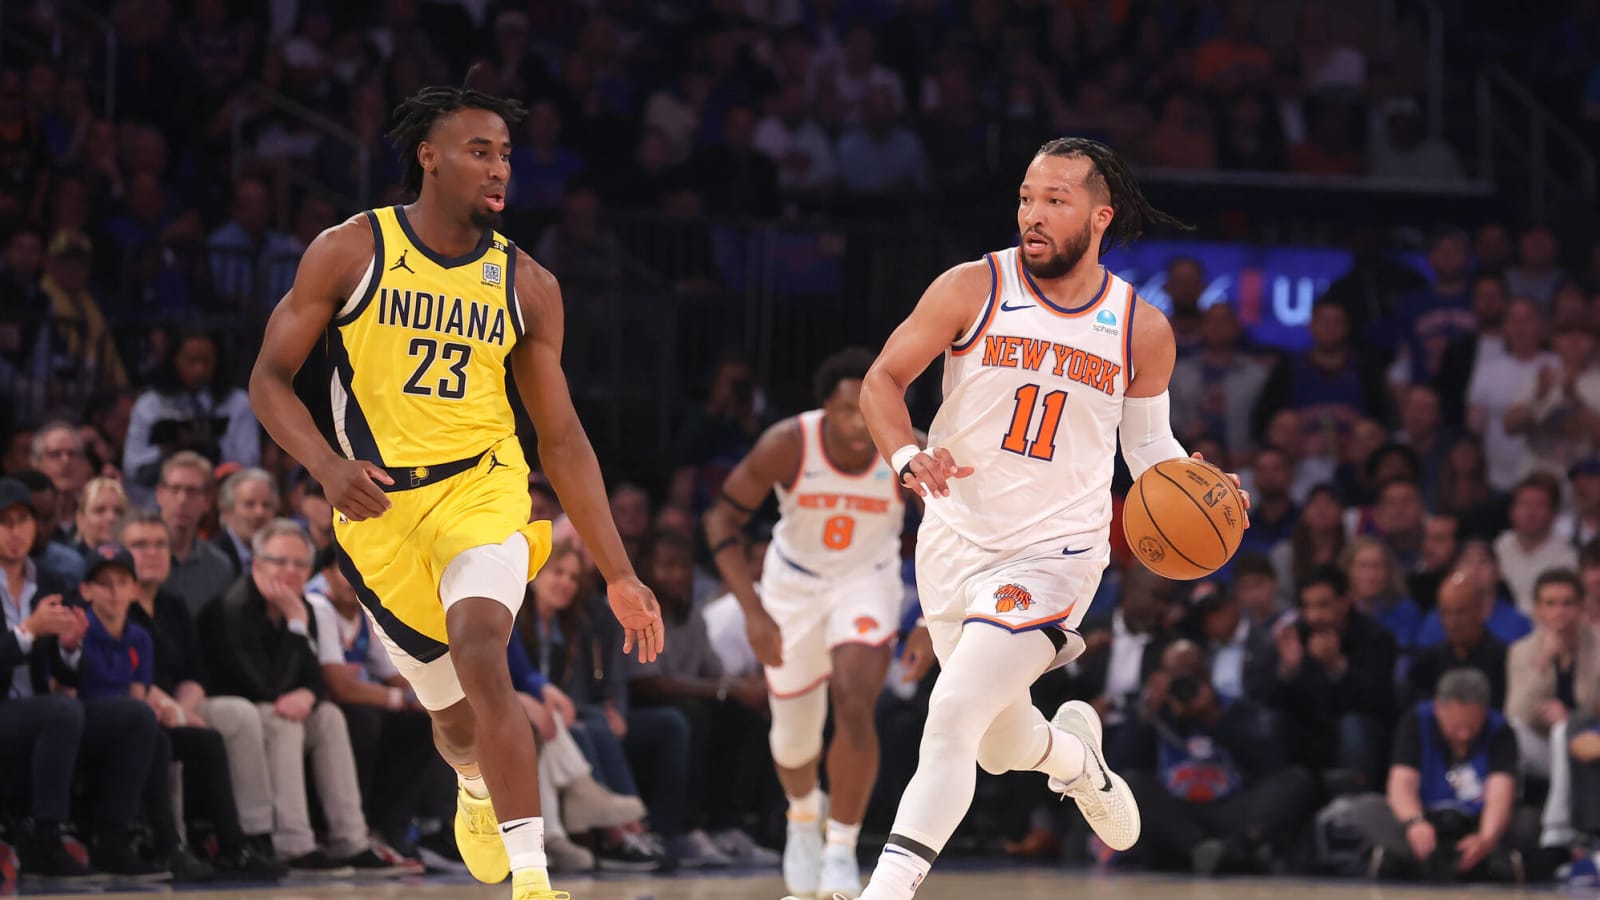 New York Knicks News: Jalen Brunson Channels Inner Bernard King in Another 40-Point Explosion in Game 1 Win Vs. Indiana Pacers